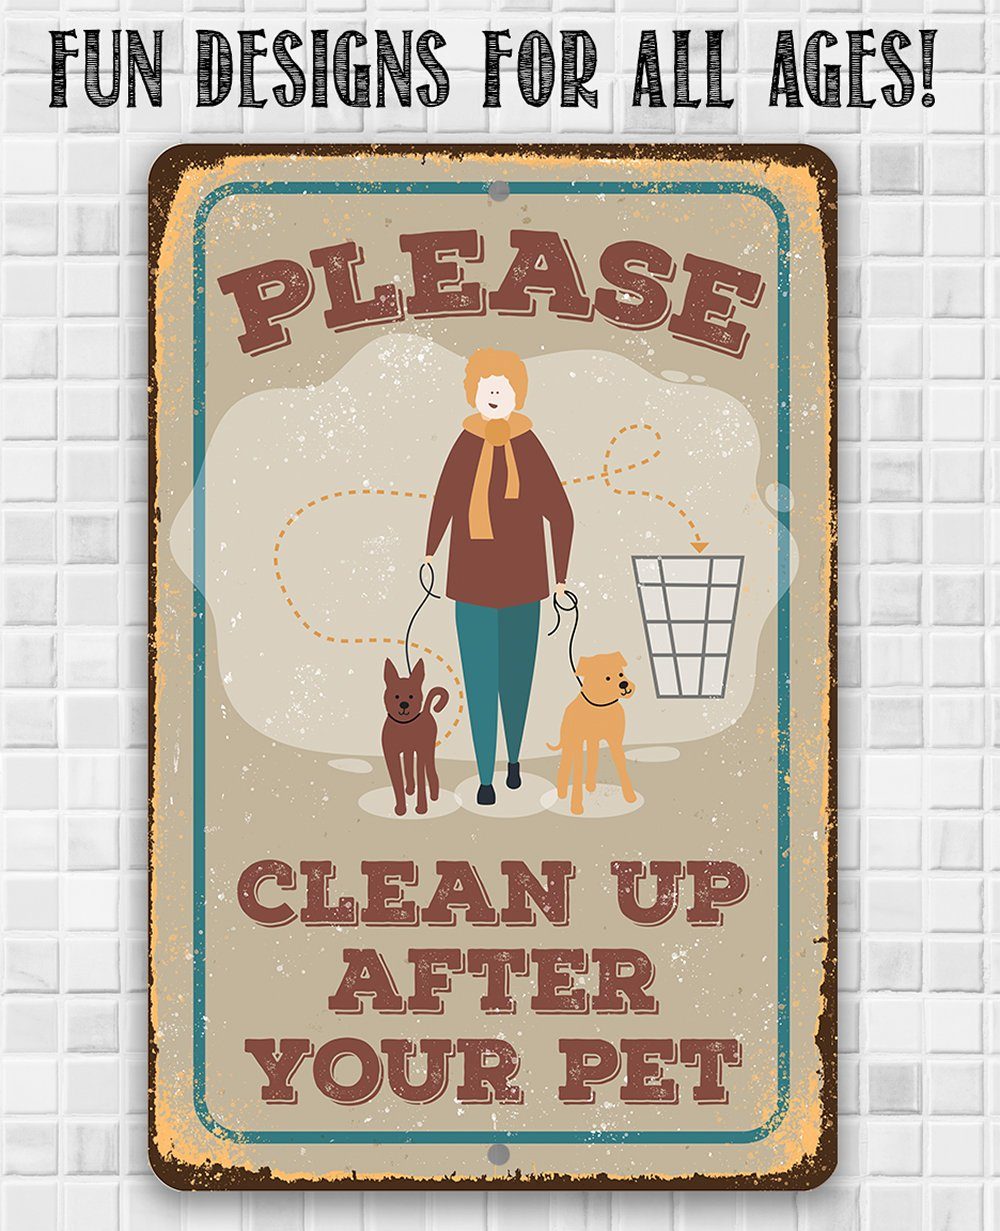 Please Clean Up After Pet - Metal Sign | Lone Star Art.